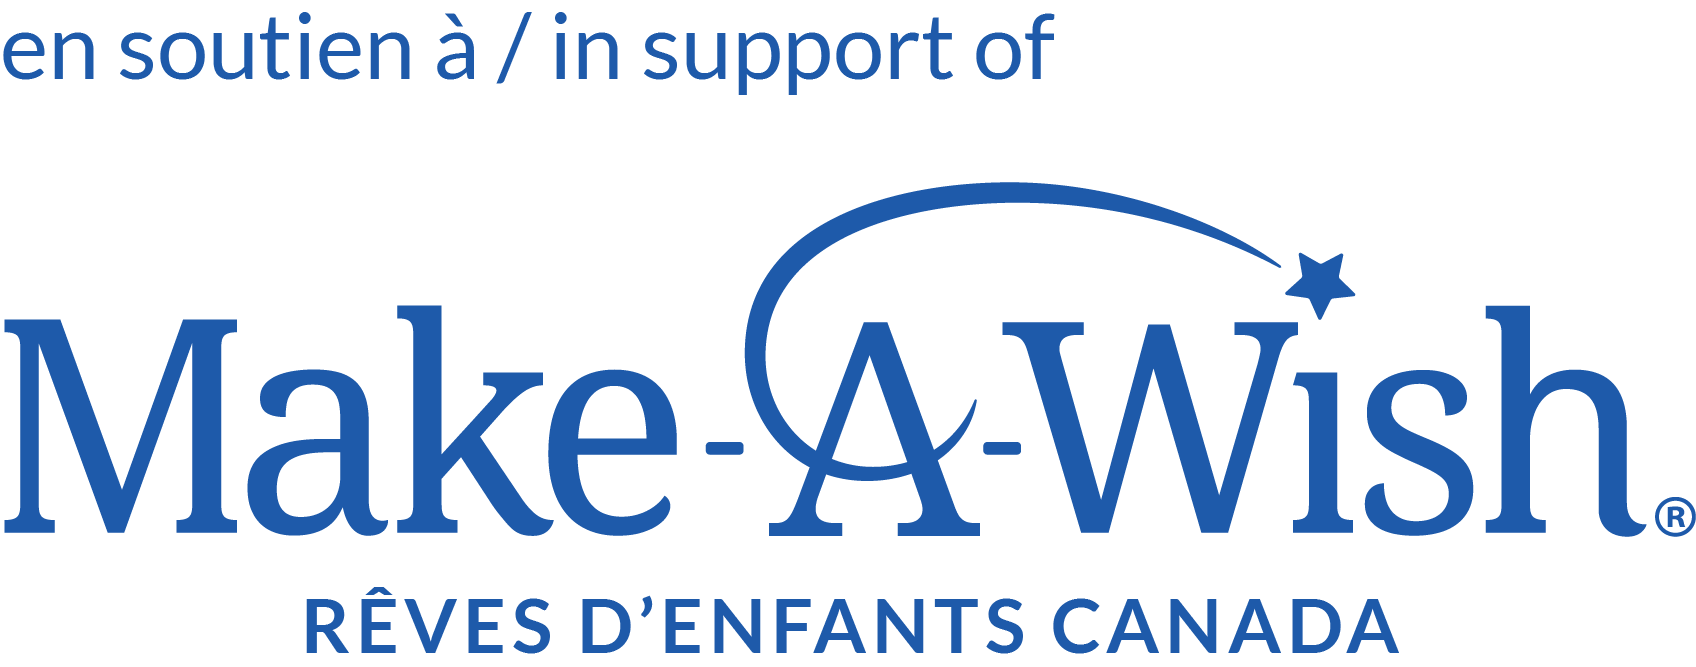 In suport of Make A Wish Logo.png